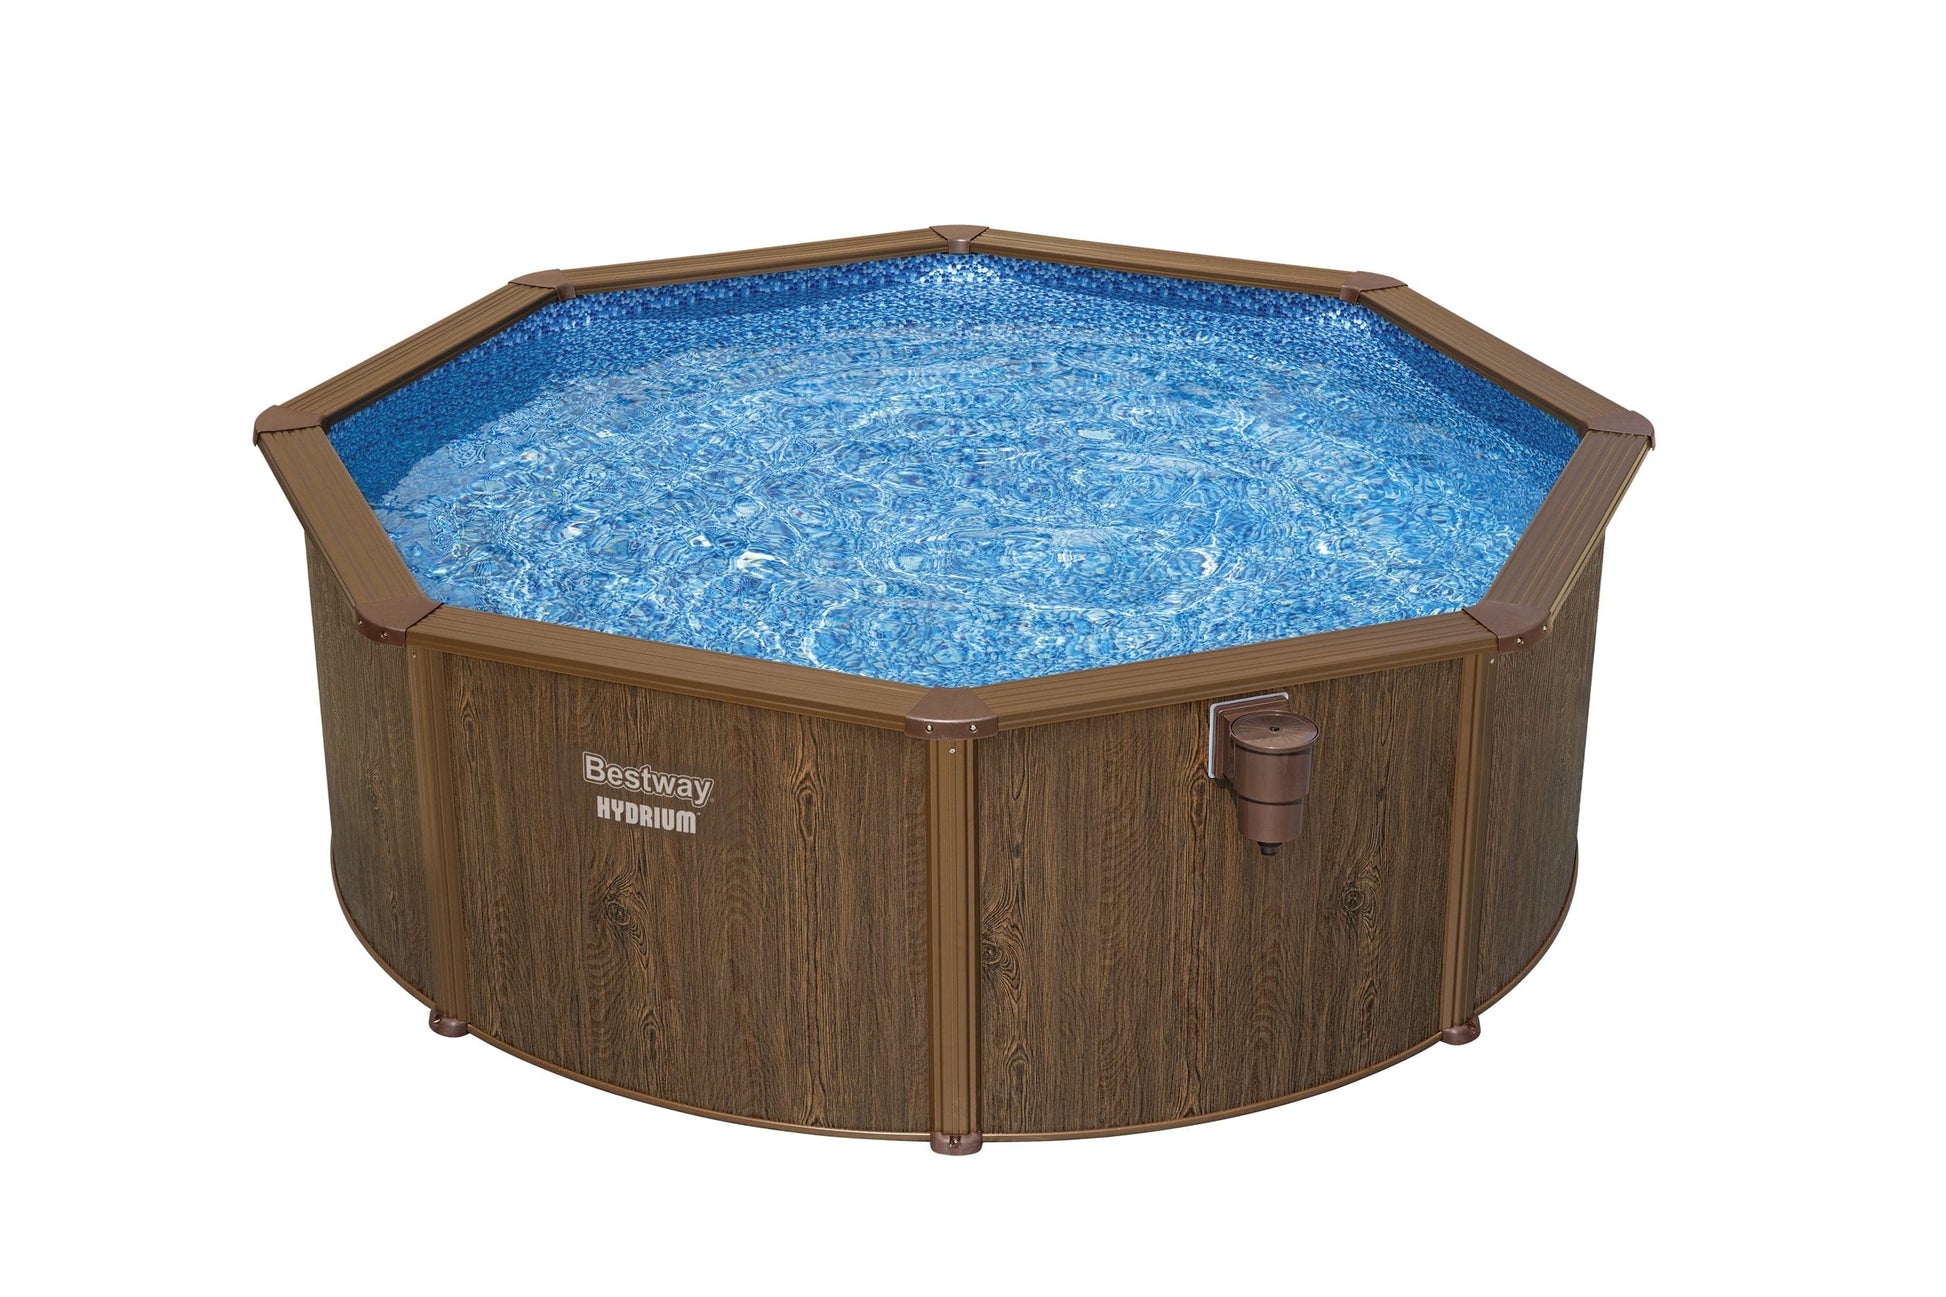 HYDRIUM POOL WOOD 360X120 WITH SAND FILTER COVER AND BASE MAT INCLUDED